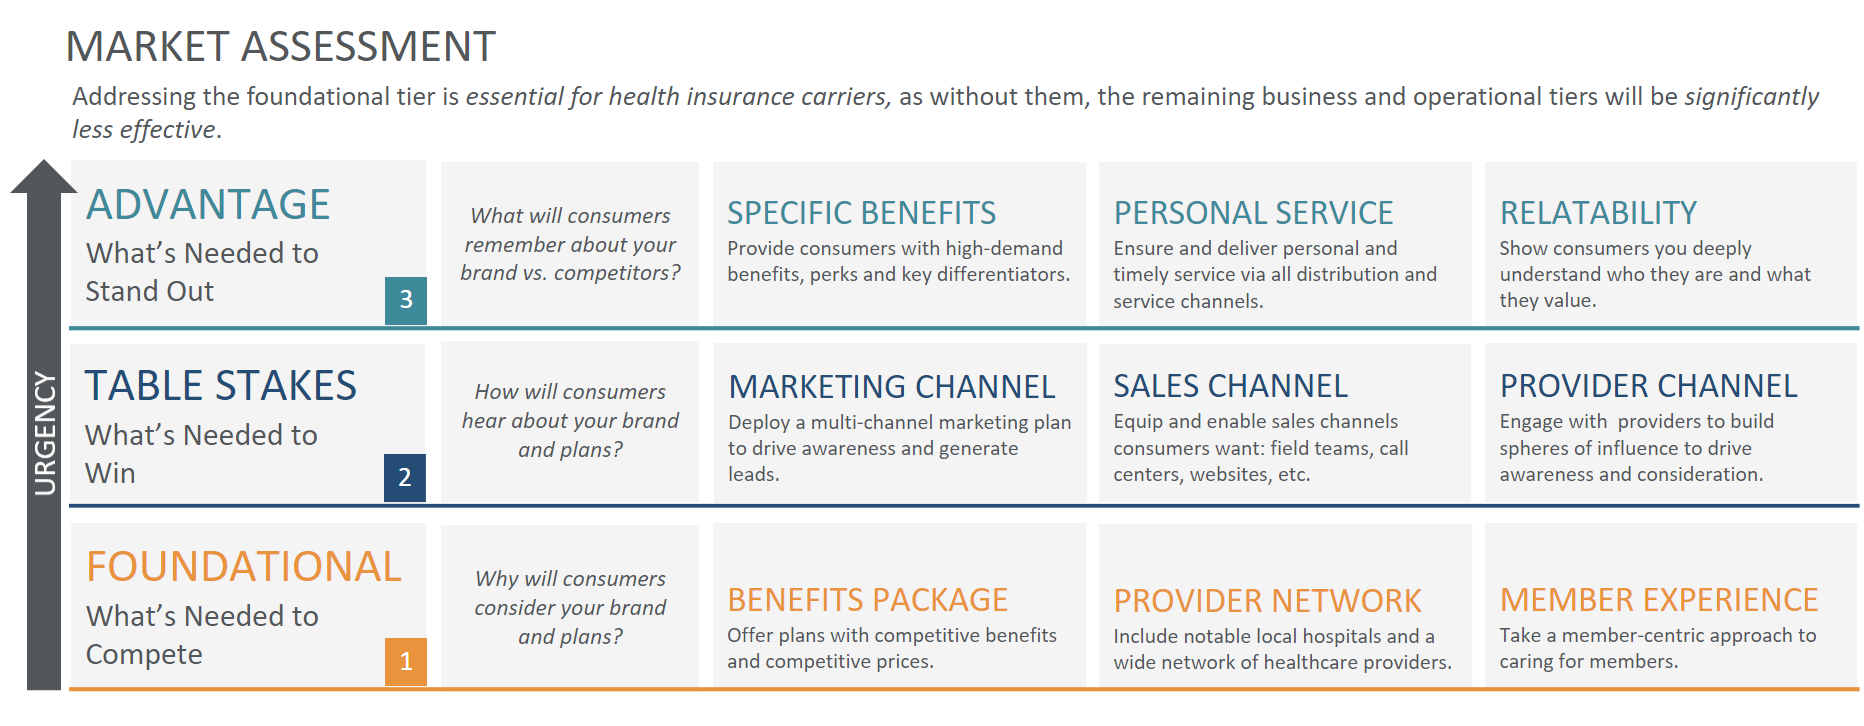 Health Insurance Leaders: How to Access Your Underperforming Markets ; Market Assessment